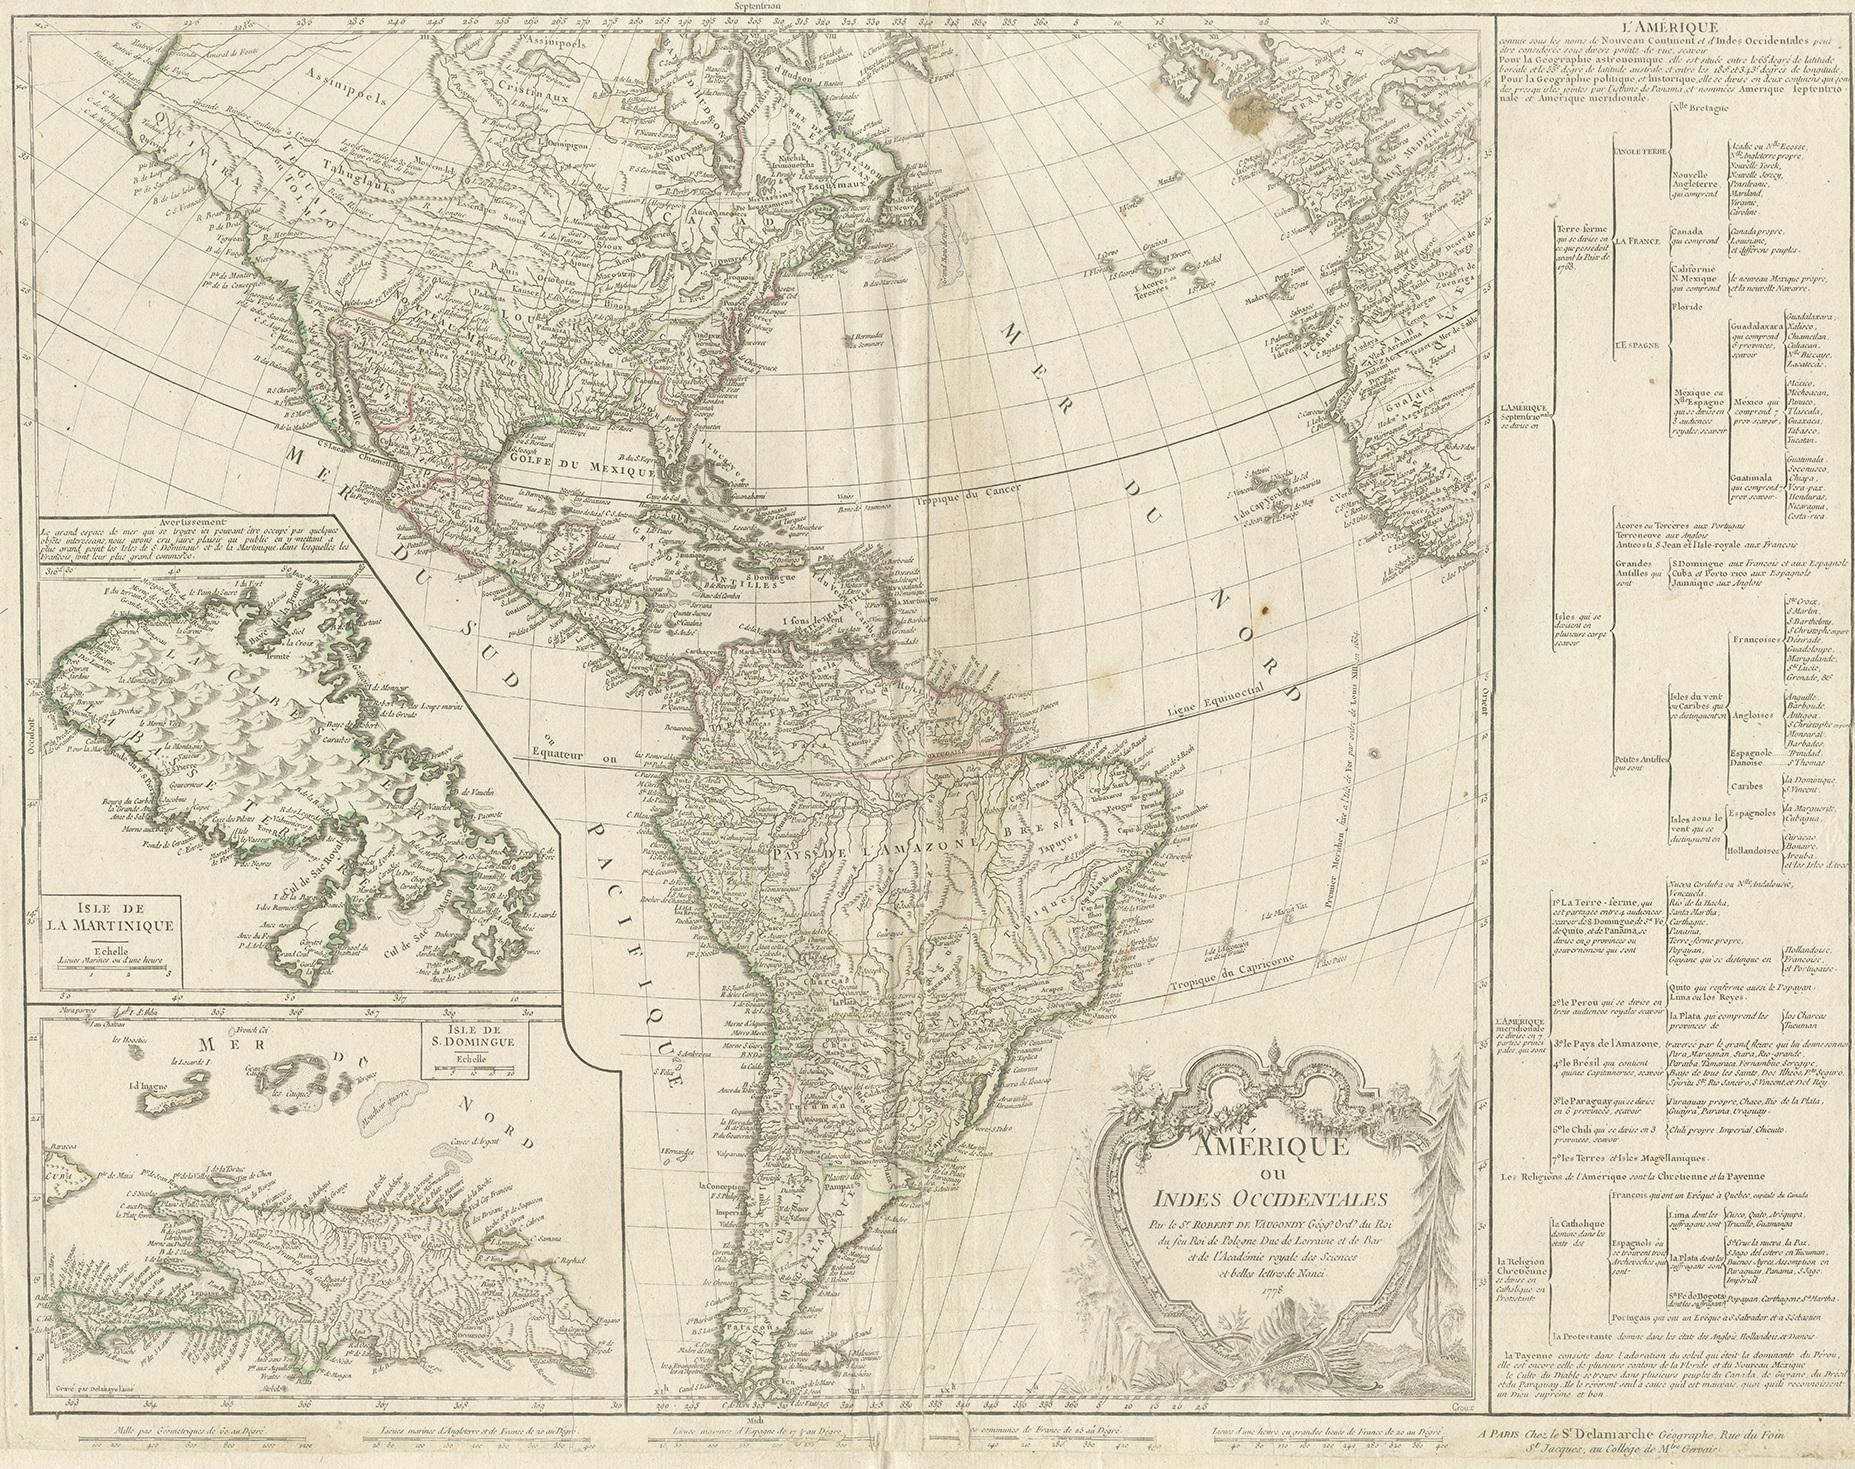 Antique map titled 'Amerique ou Indes Occidentales (..)'. Vaugondy's map of America, pre-dating information from any of the Cook Voyages. The NW Coast of America is shown wildly distorted to the west, with a number of mythical rivers flowing from